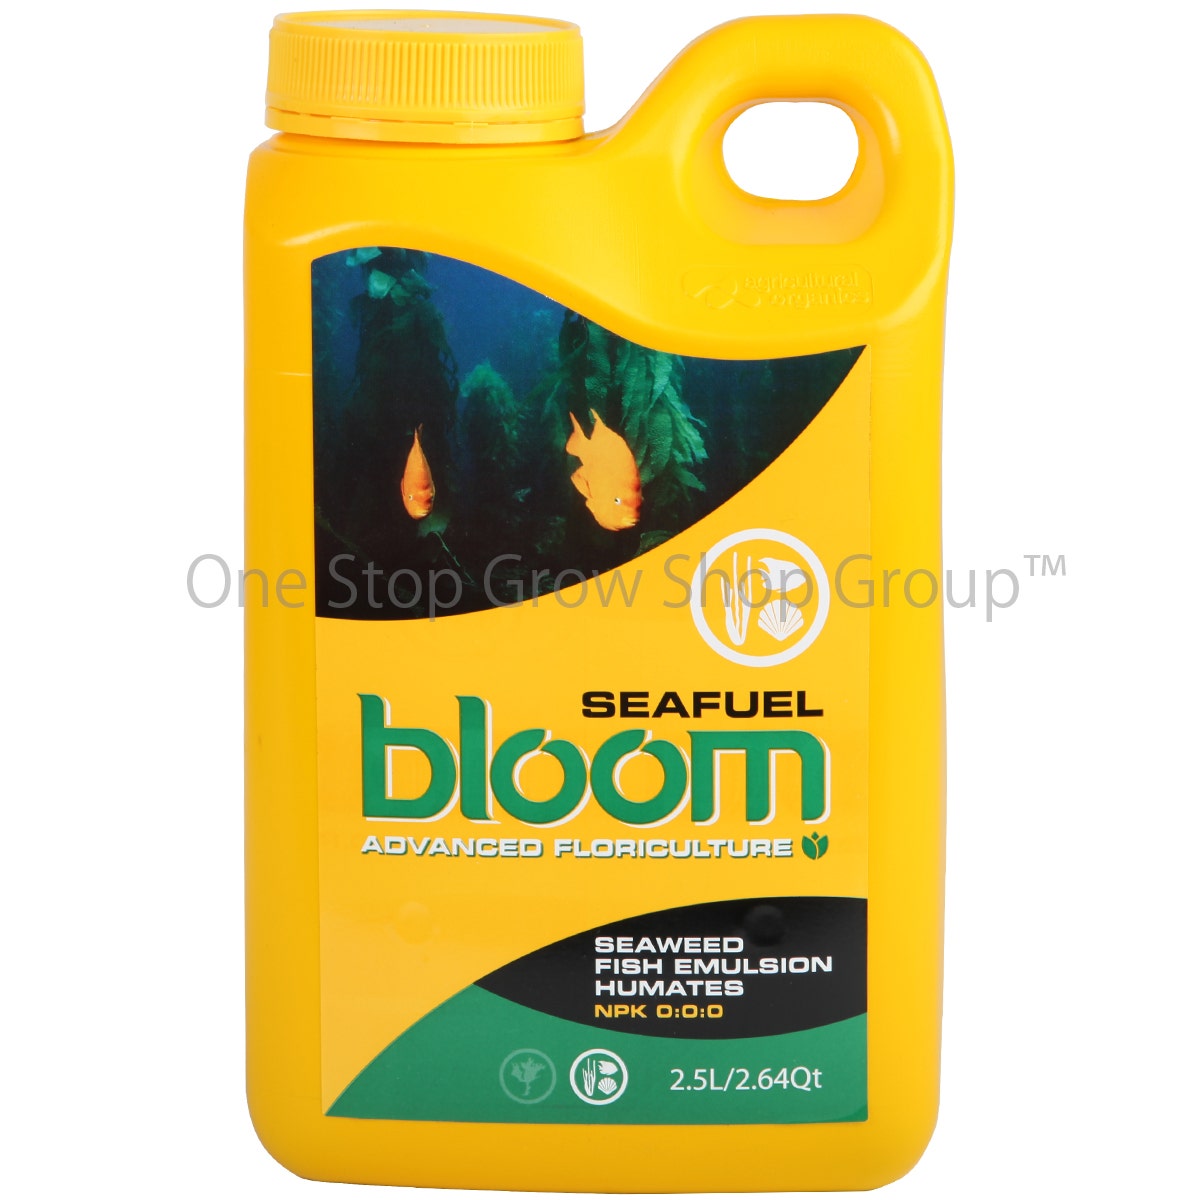 Bloom- SEAFUEL - Super Concentrate